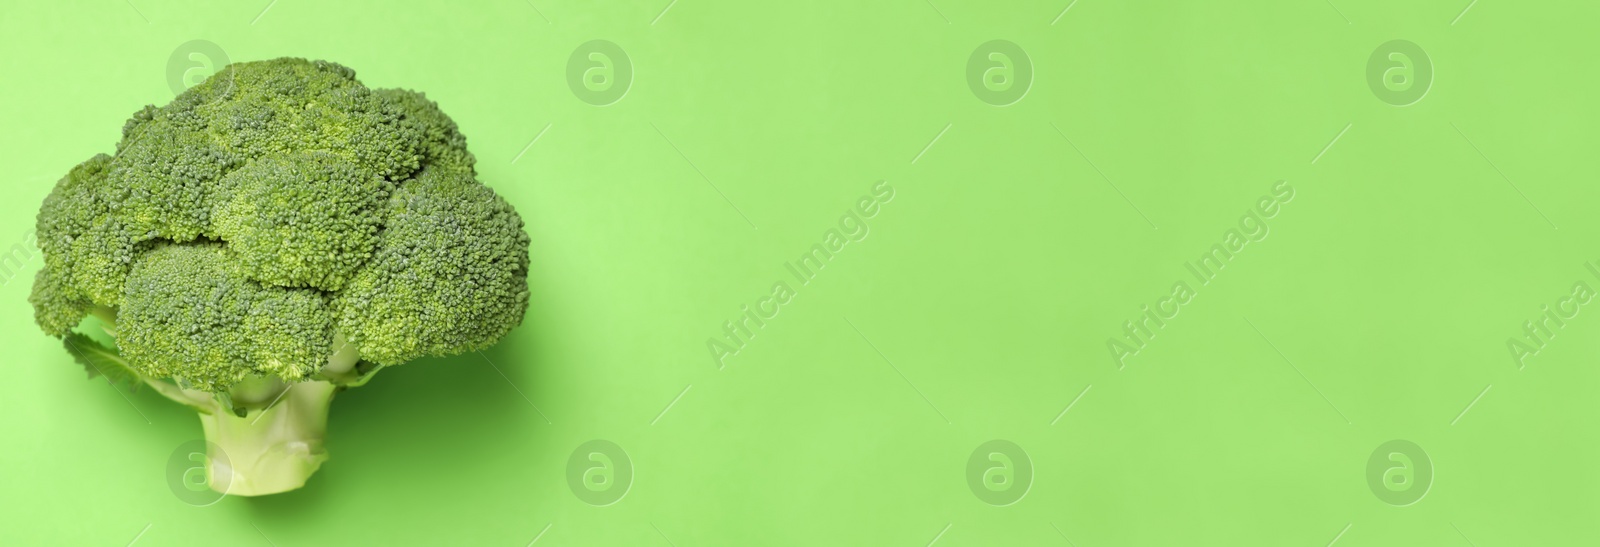 Image of Top view of fresh broccoli on green background, space for text. Banner design 